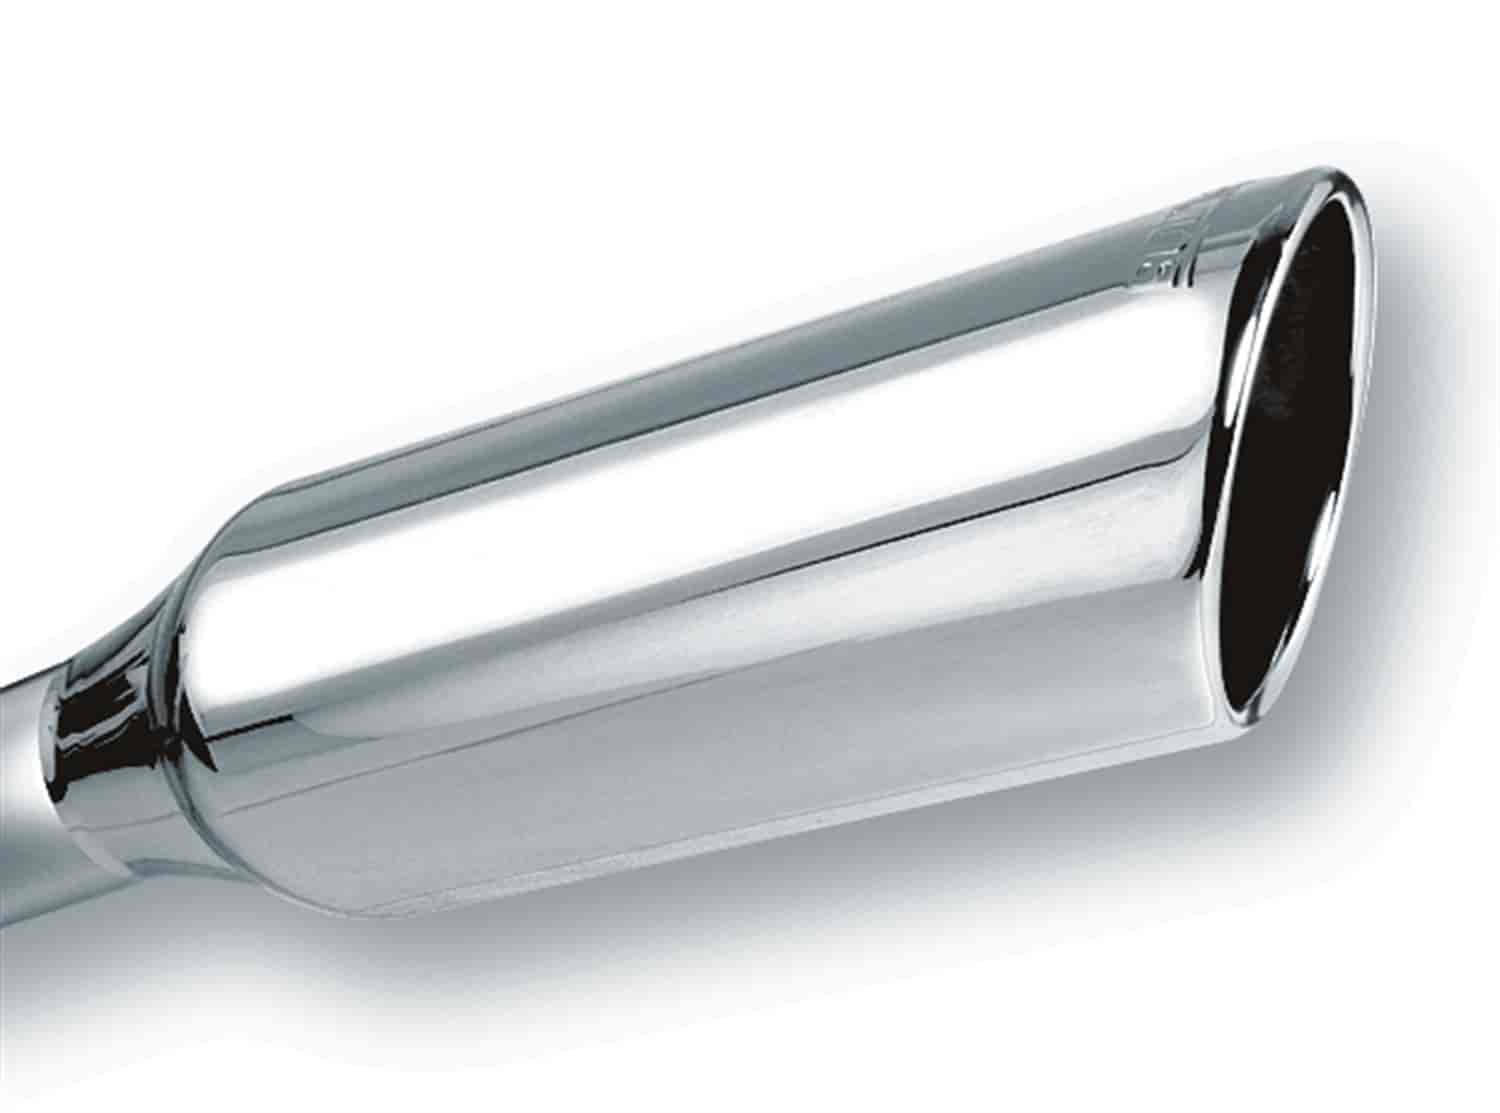 Stainless Steel Exhaust Tip Outlet Size: 4"